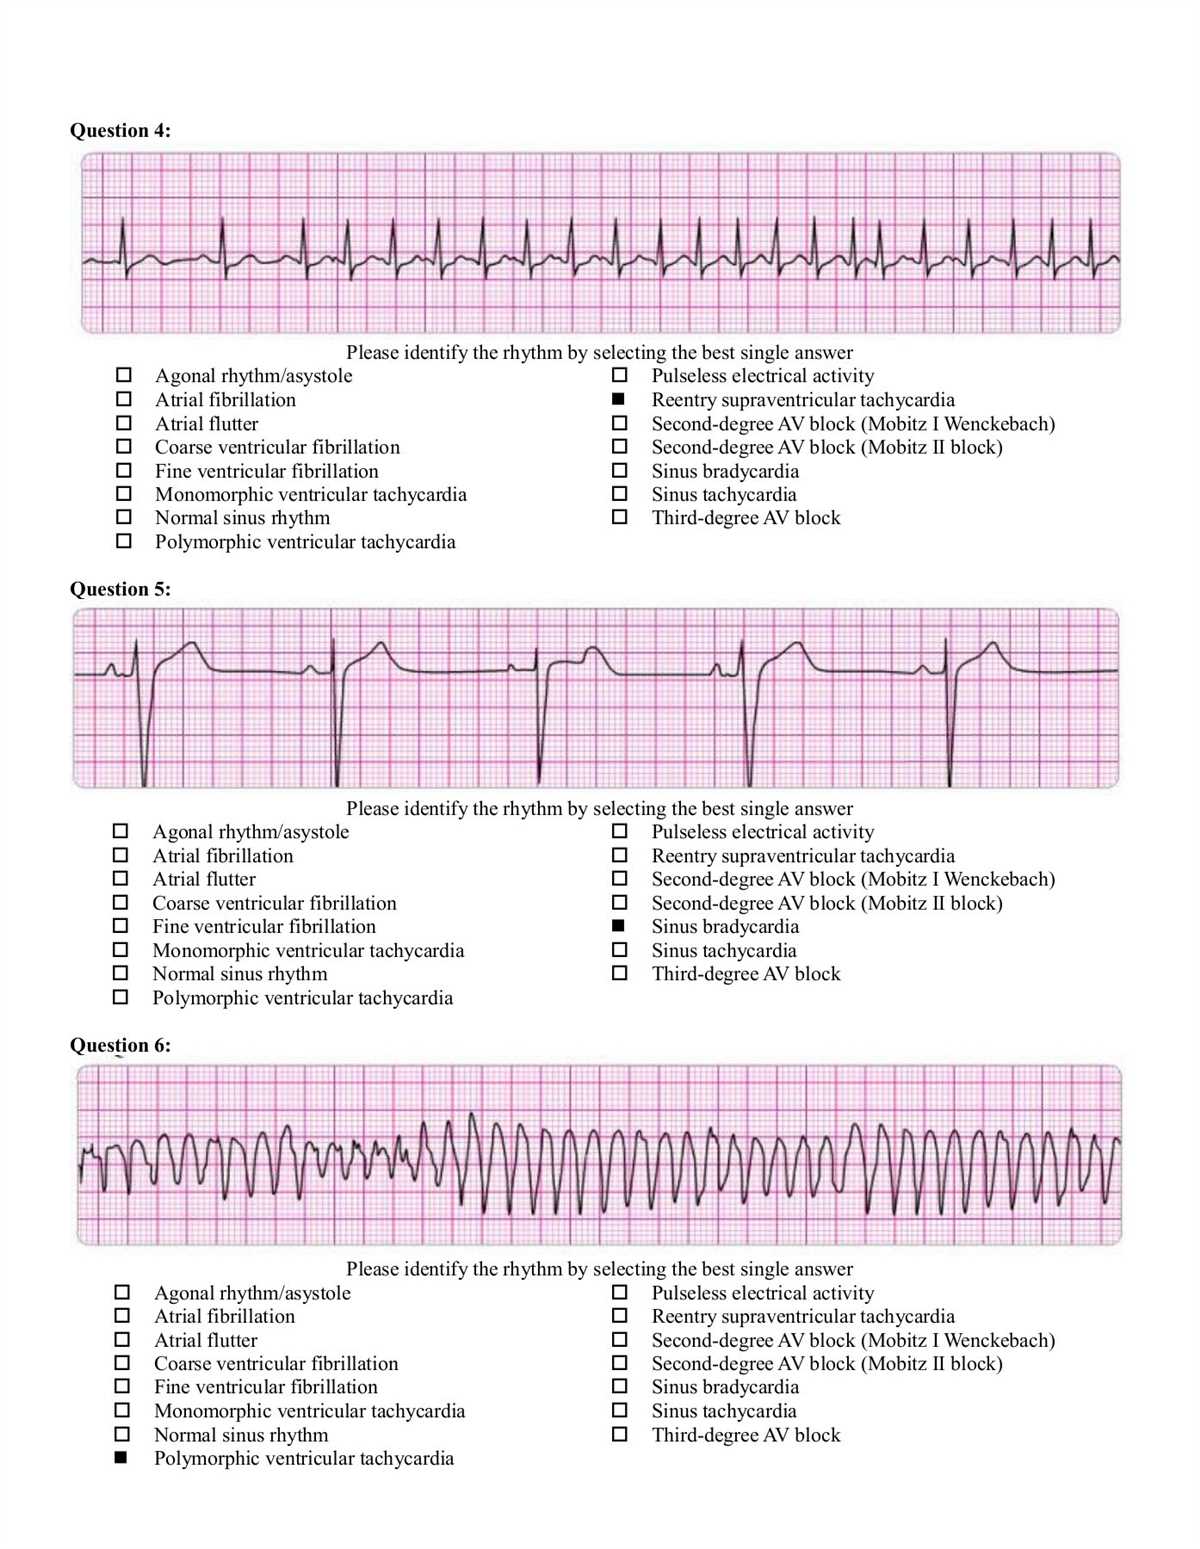 How to interpret ACLS test results?